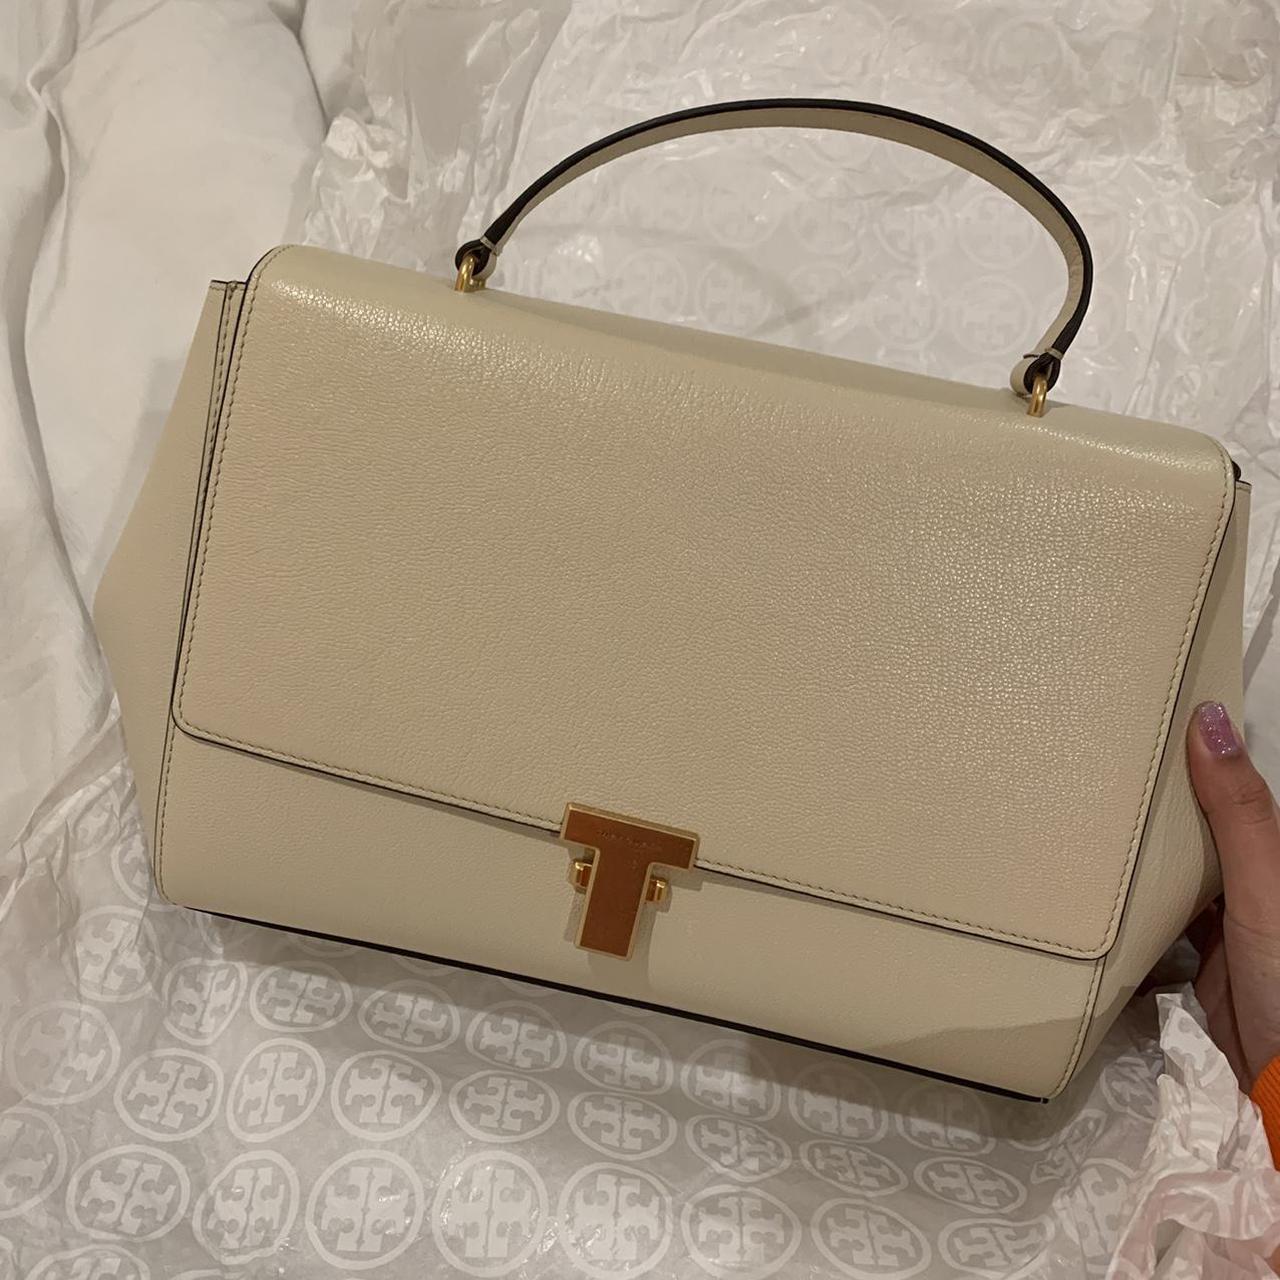 Tory Burch Handbag | Authentic Tote from Saks Fifth Avenue